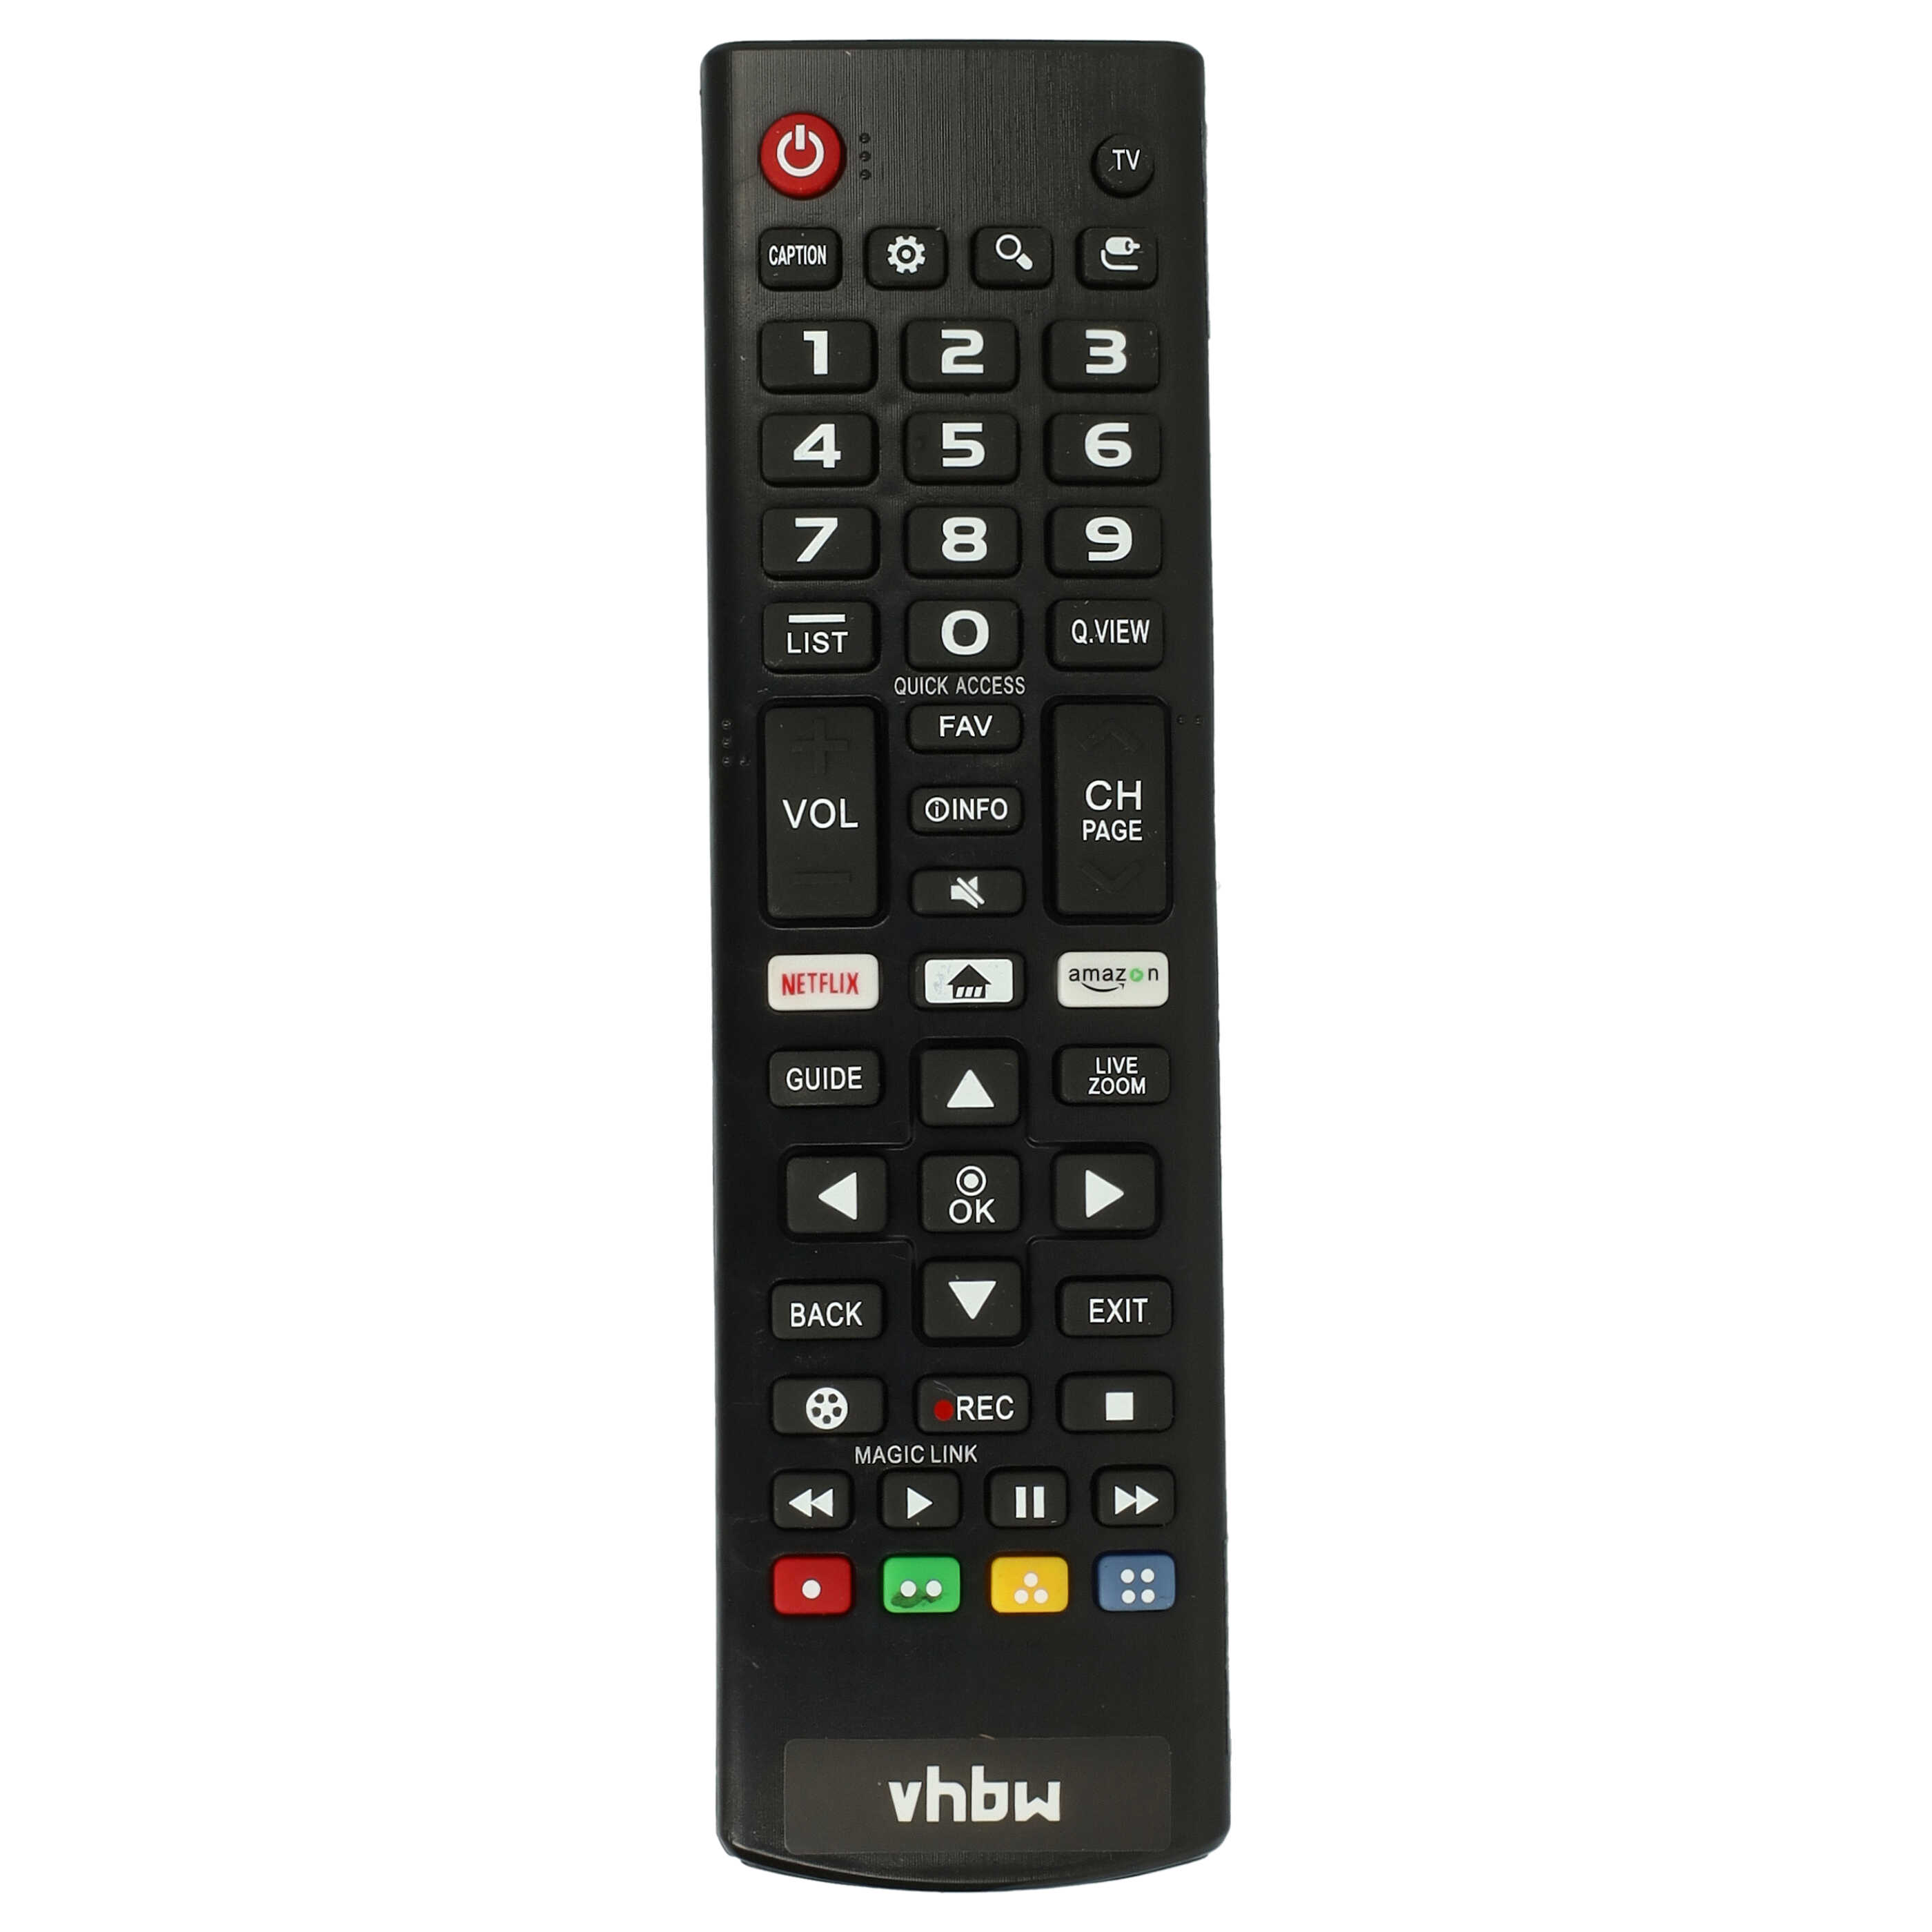 Remote Control replaces LG AKB75095315 for LG TV